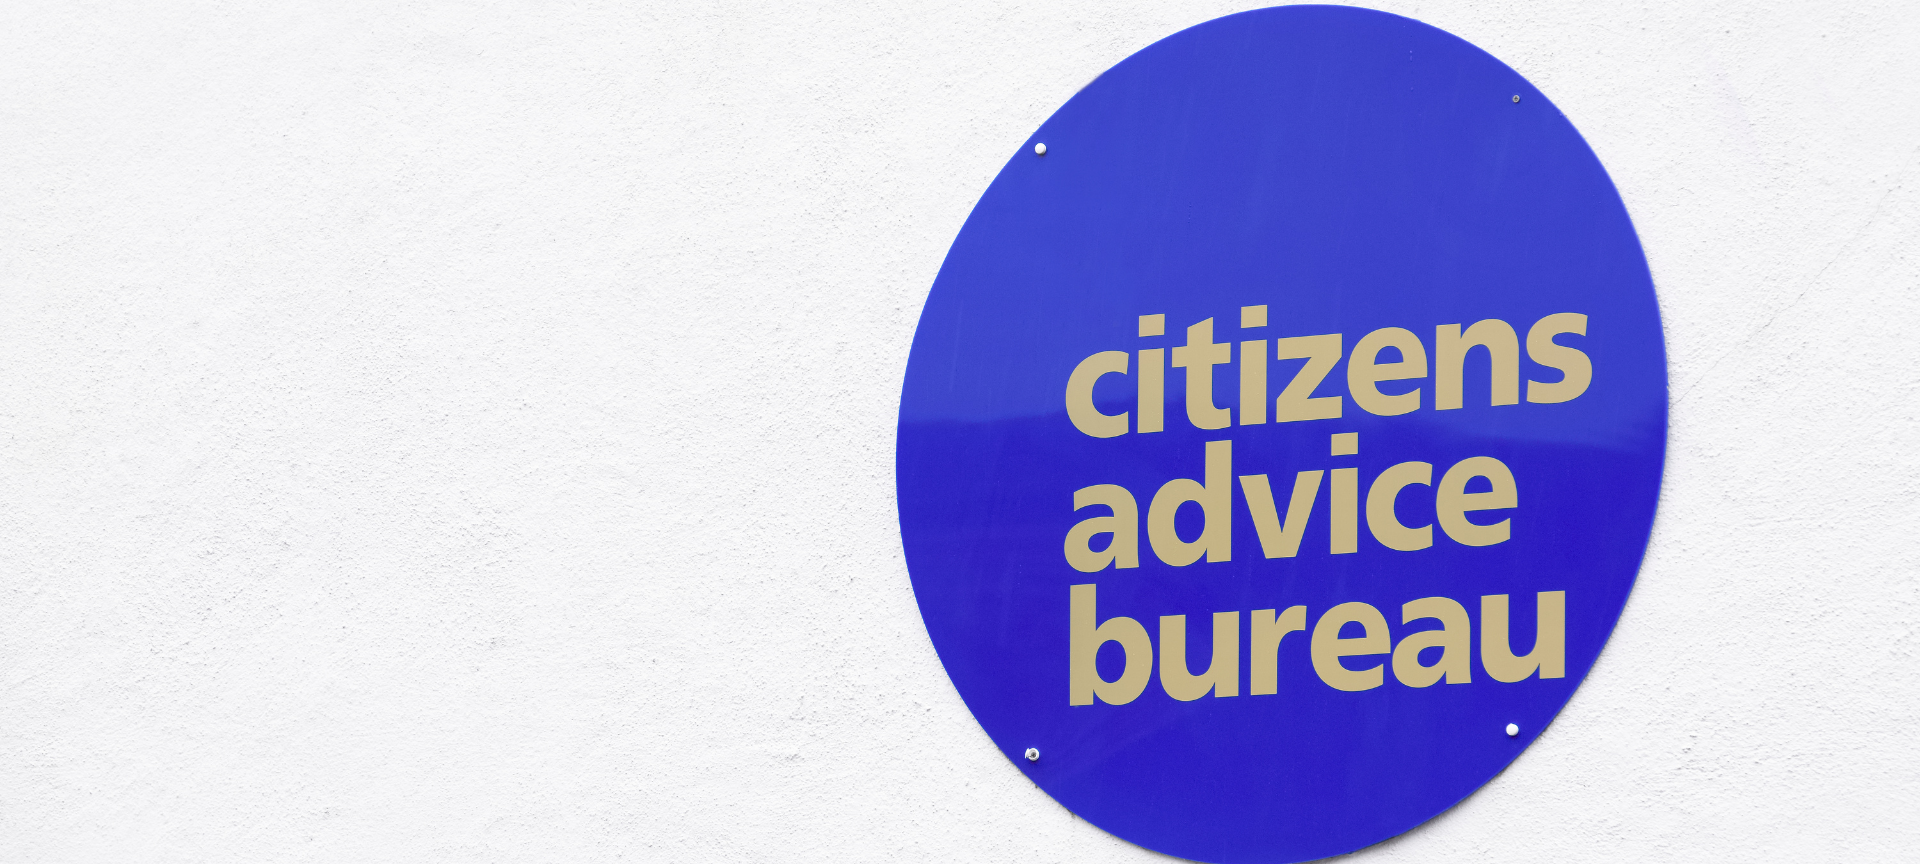 Citizens Advice Bureau receives support from the community